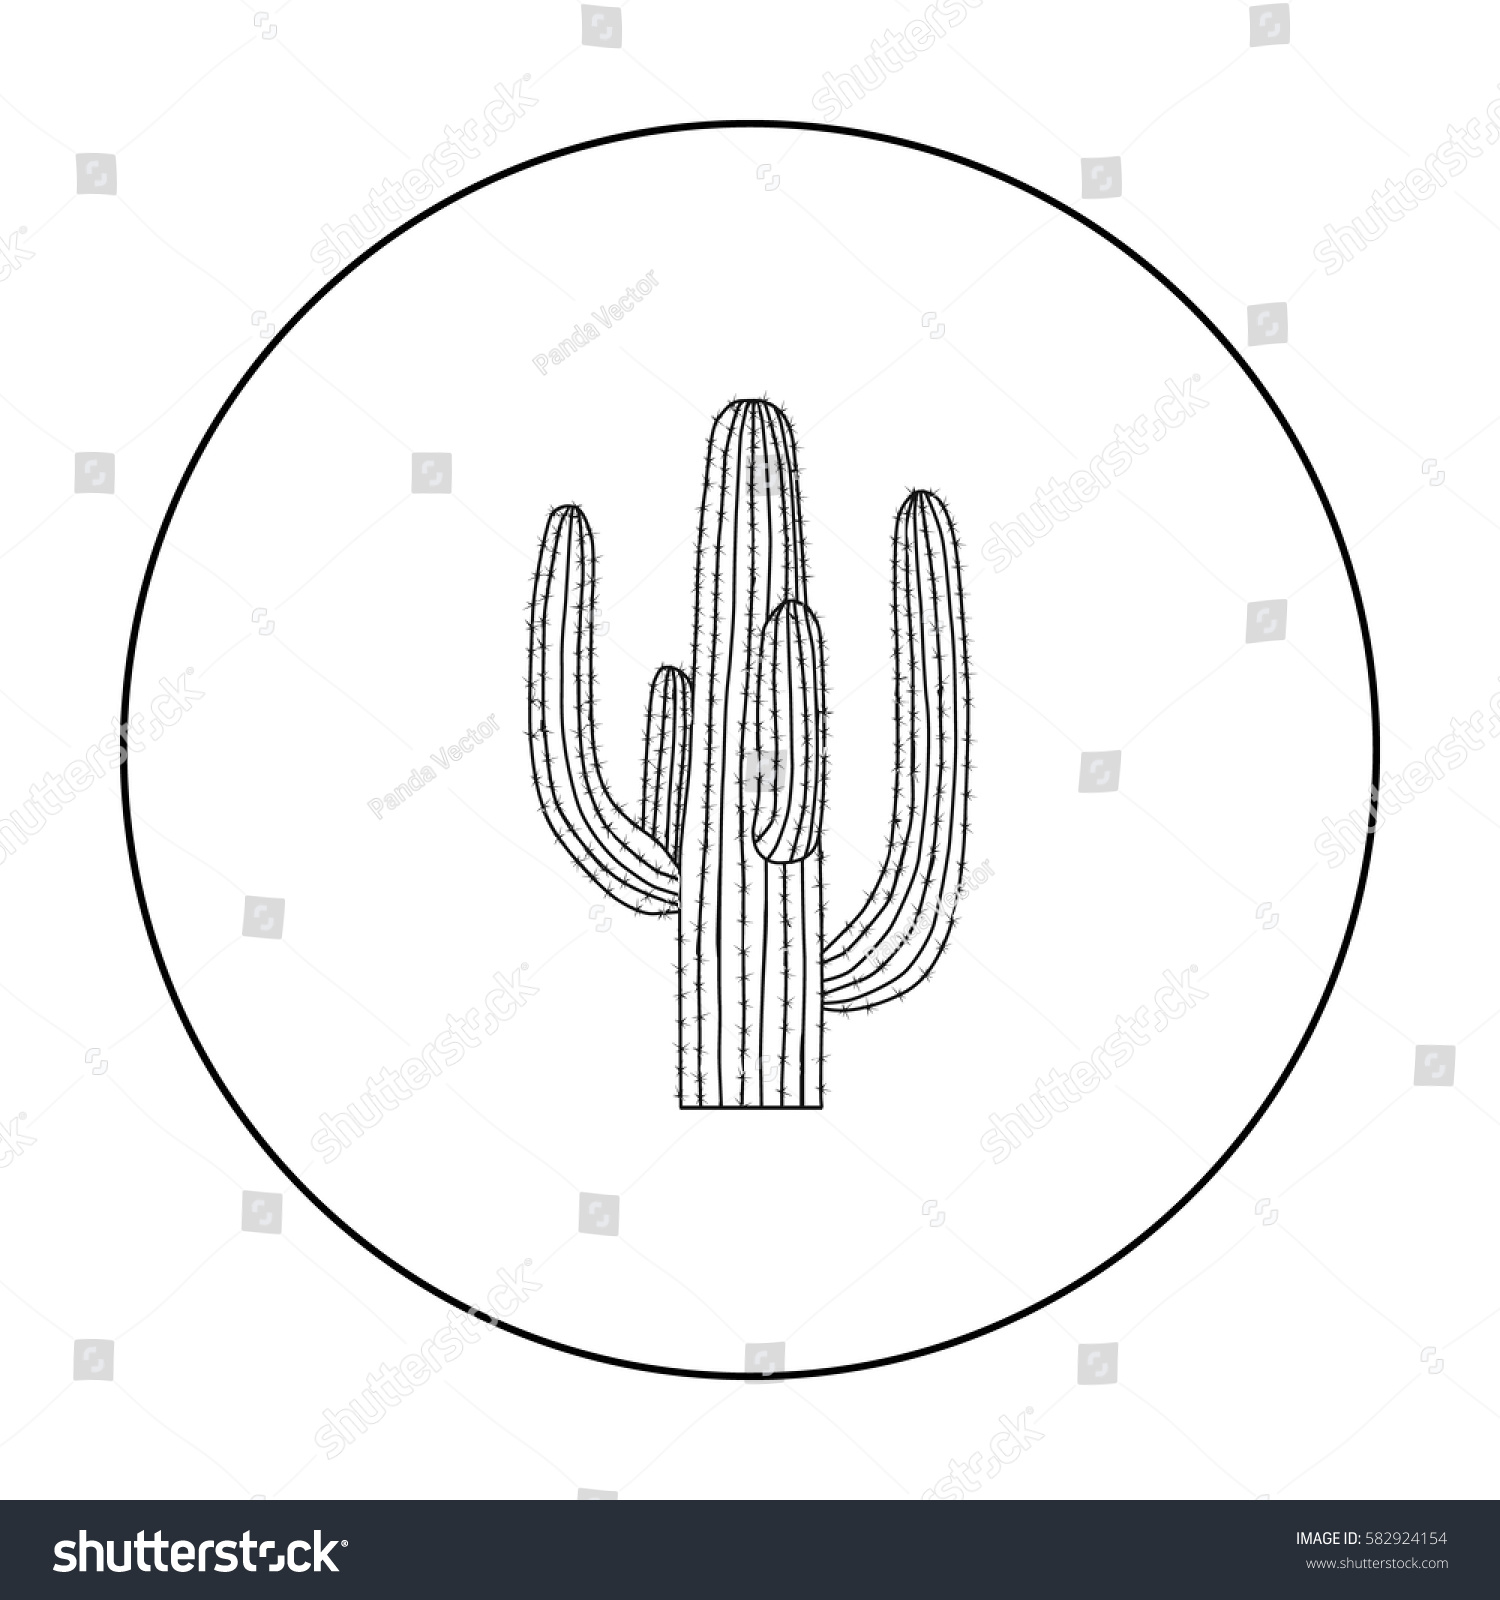 SVG of Mexican cactus icon in outline style isolated on white background. Mexico country symbol stock vector illustration. svg